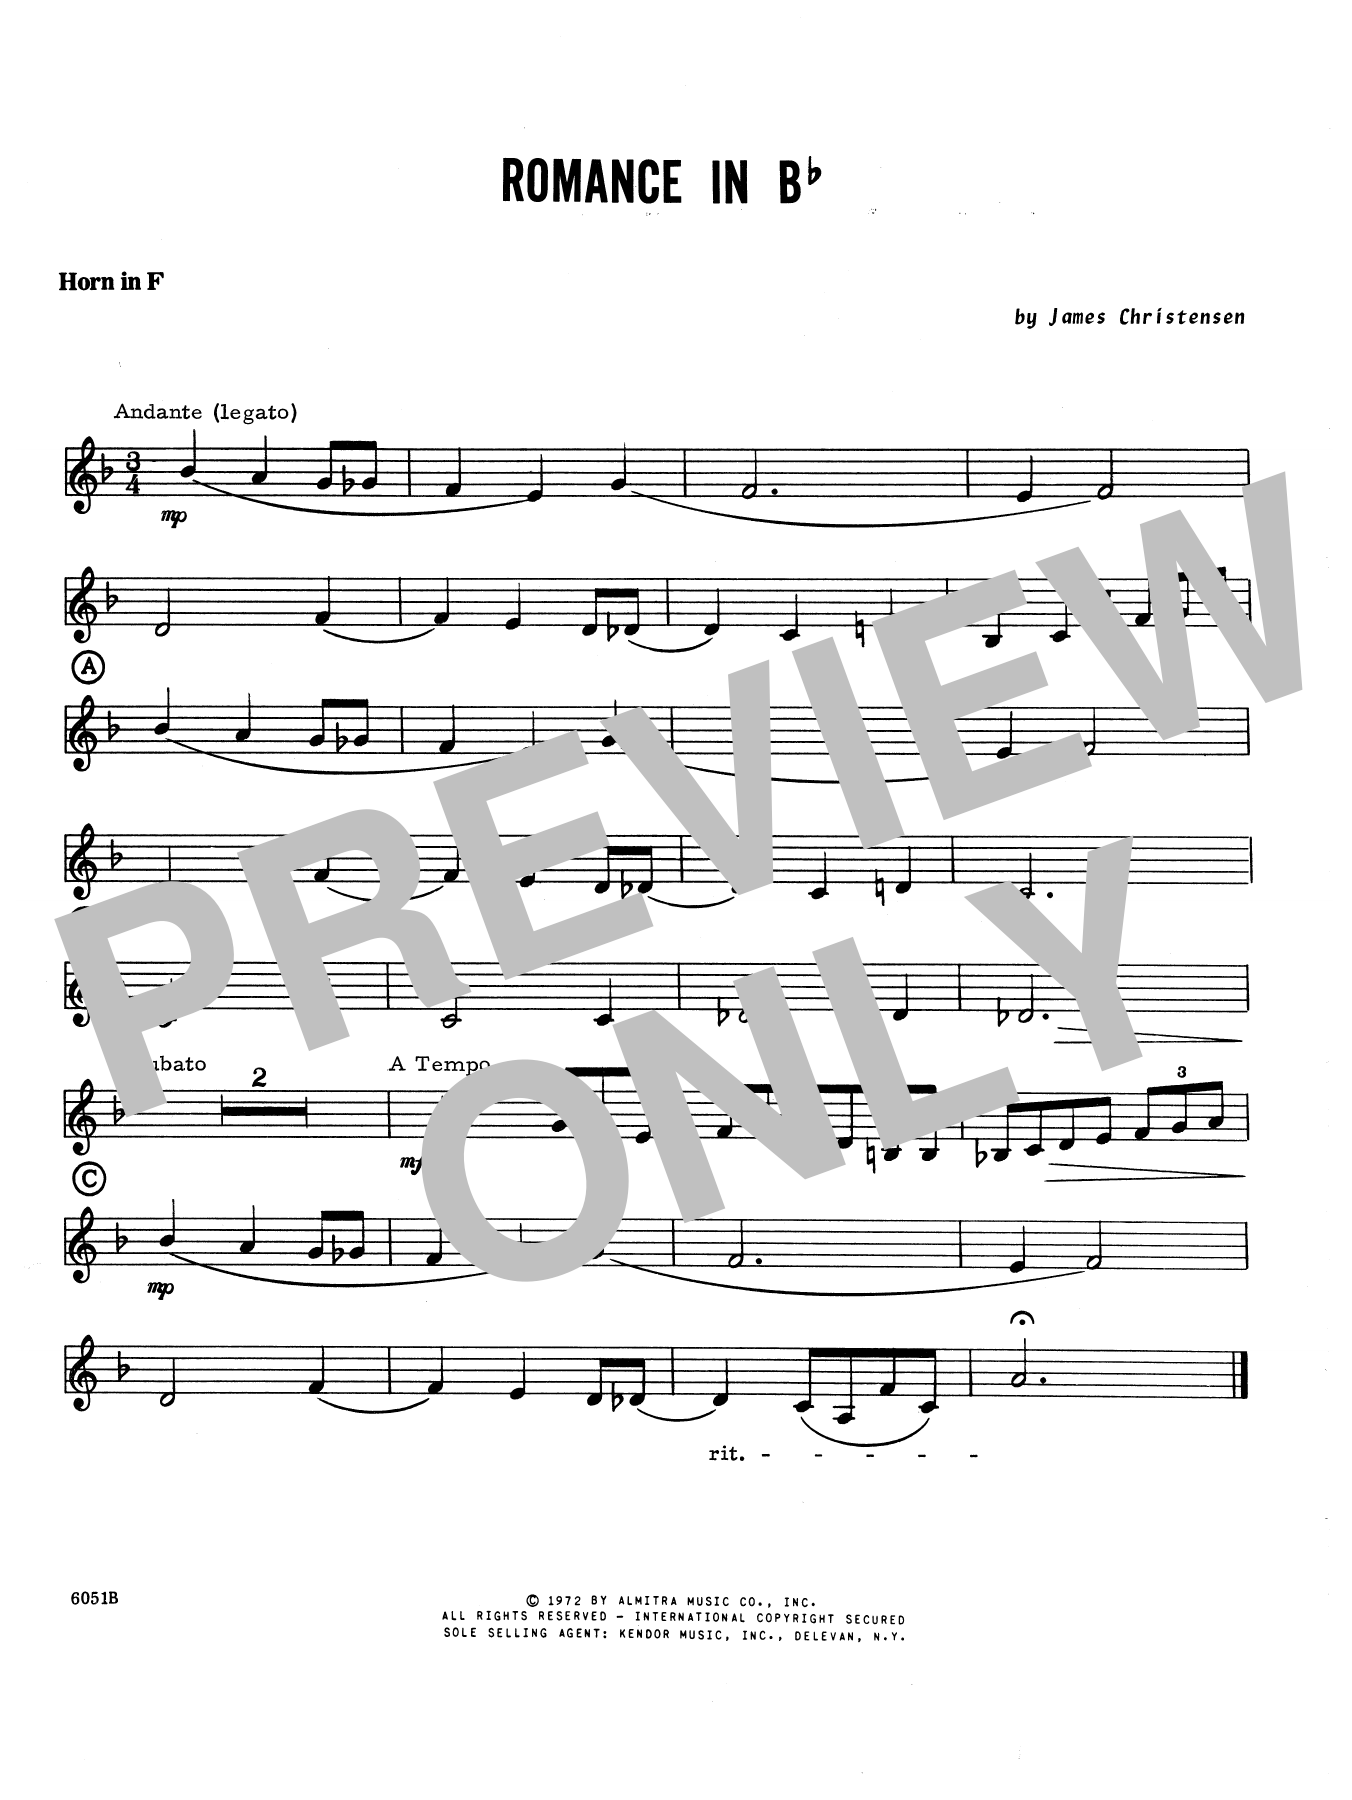 James Christensen Romance In Bb - Horn in F sheet music notes and chords. Download Printable PDF.